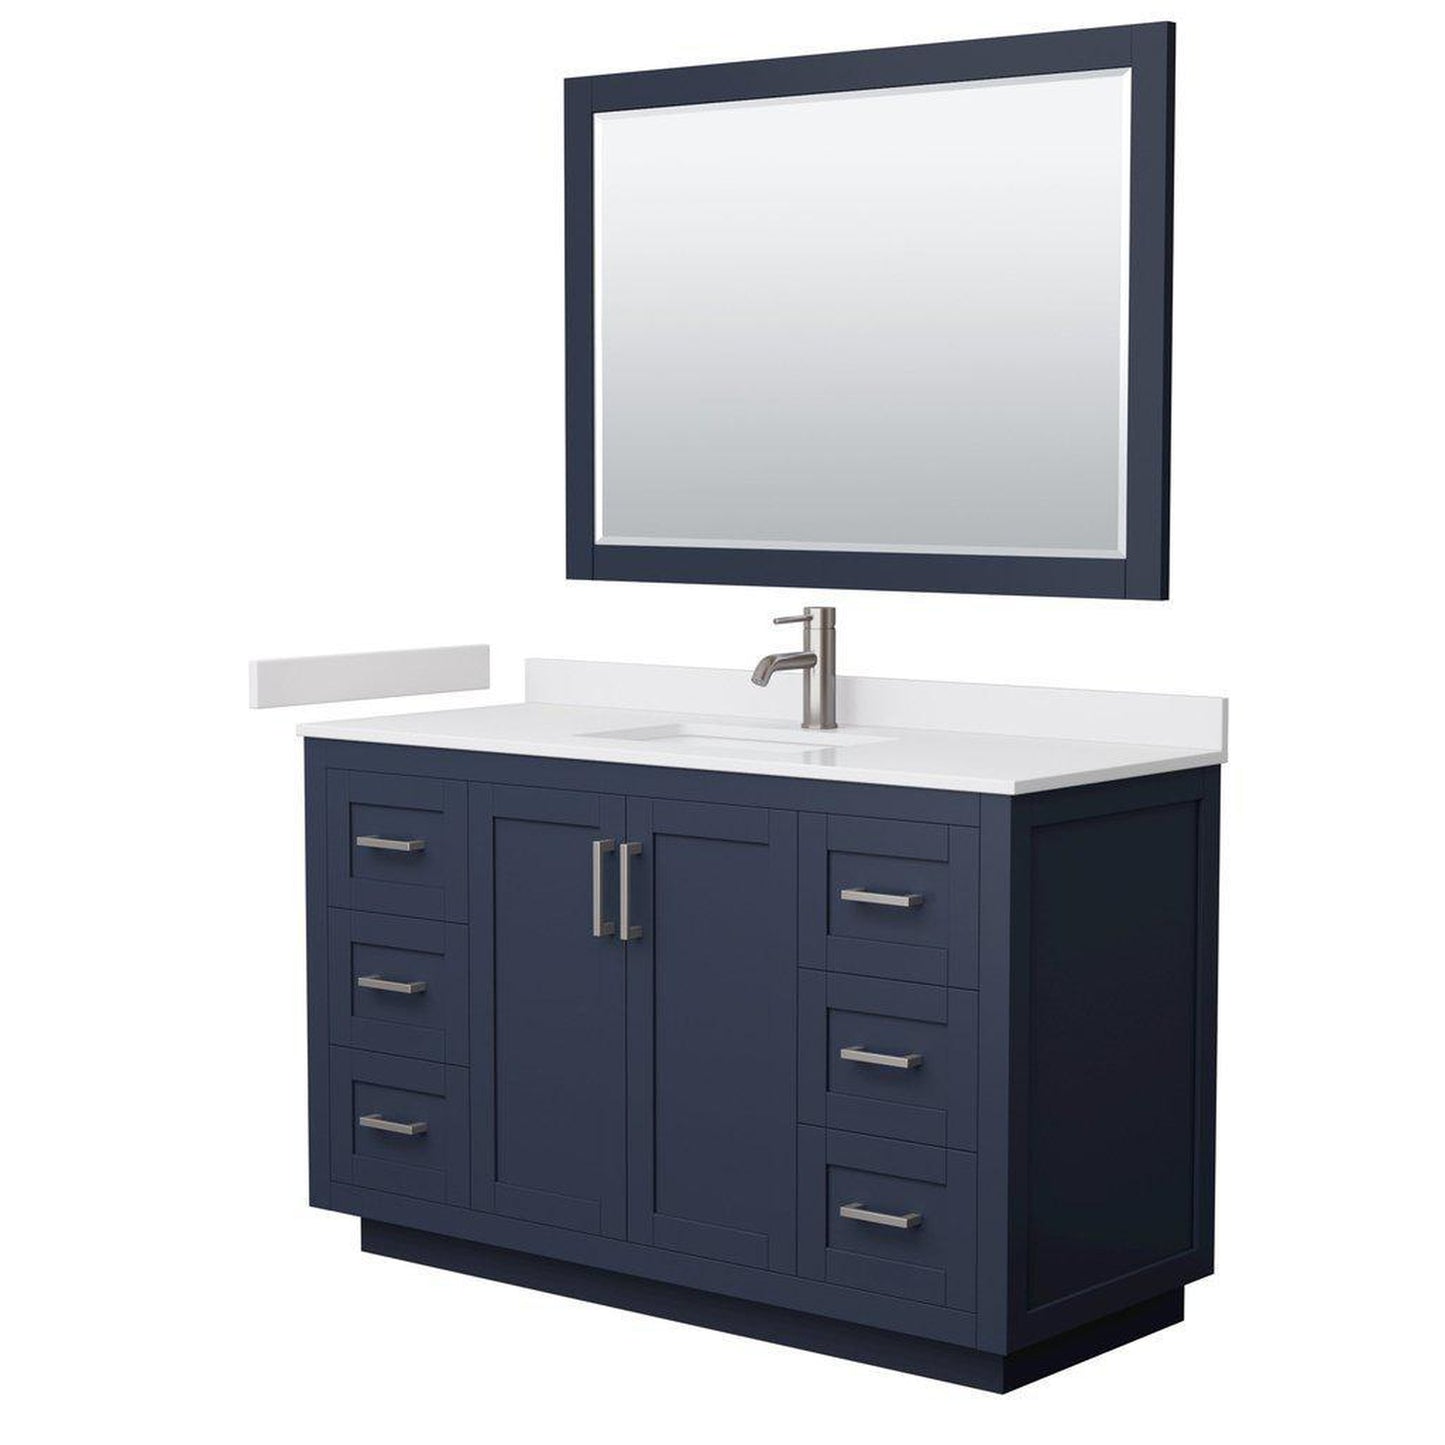 Wyndham Collection Miranda 54" Single Bathroom Dark Blue Vanity Set With White Cultured Marble Countertop, Undermount Square Sink, 46" Mirror And Brushed Nickel Trim